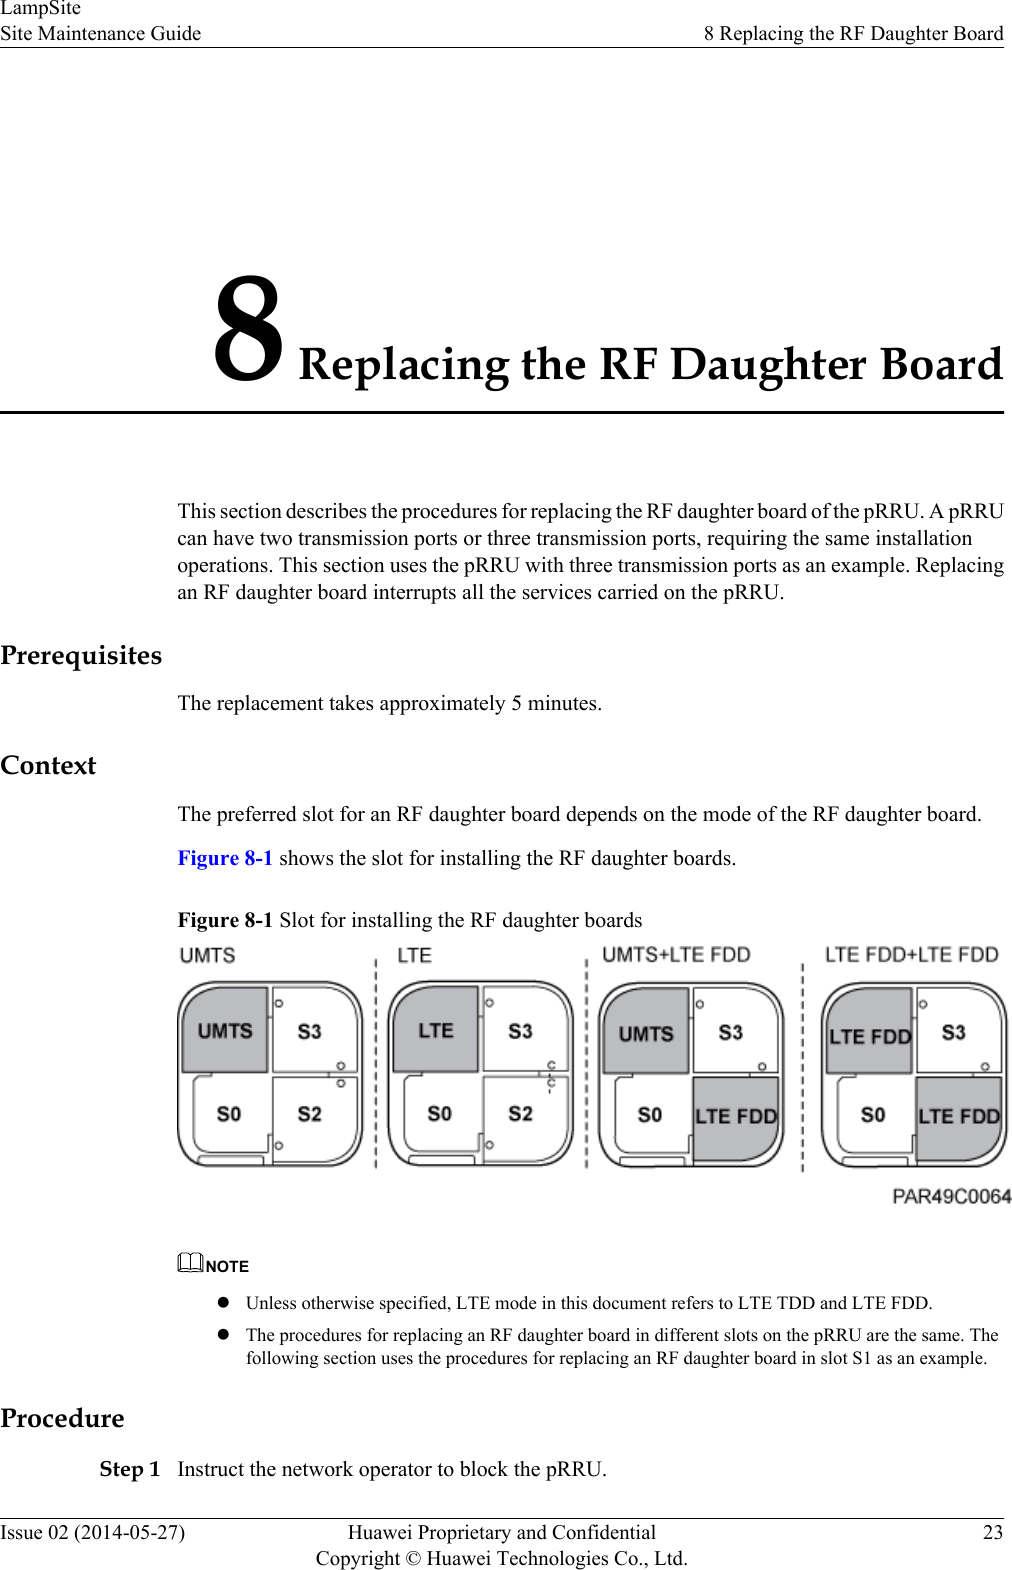 8 Replacing the RF Daughter BoardThis section describes the procedures for replacing the RF daughter board of the pRRU. A pRRUcan have two transmission ports or three transmission ports, requiring the same installationoperations. This section uses the pRRU with three transmission ports as an example. Replacingan RF daughter board interrupts all the services carried on the pRRU.PrerequisitesThe replacement takes approximately 5 minutes.ContextThe preferred slot for an RF daughter board depends on the mode of the RF daughter board.Figure 8-1 shows the slot for installing the RF daughter boards.Figure 8-1 Slot for installing the RF daughter boardsNOTElUnless otherwise specified, LTE mode in this document refers to LTE TDD and LTE FDD.lThe procedures for replacing an RF daughter board in different slots on the pRRU are the same. Thefollowing section uses the procedures for replacing an RF daughter board in slot S1 as an example.ProcedureStep 1 Instruct the network operator to block the pRRU.LampSiteSite Maintenance Guide 8 Replacing the RF Daughter BoardIssue 02 (2014-05-27) Huawei Proprietary and ConfidentialCopyright © Huawei Technologies Co., Ltd.23